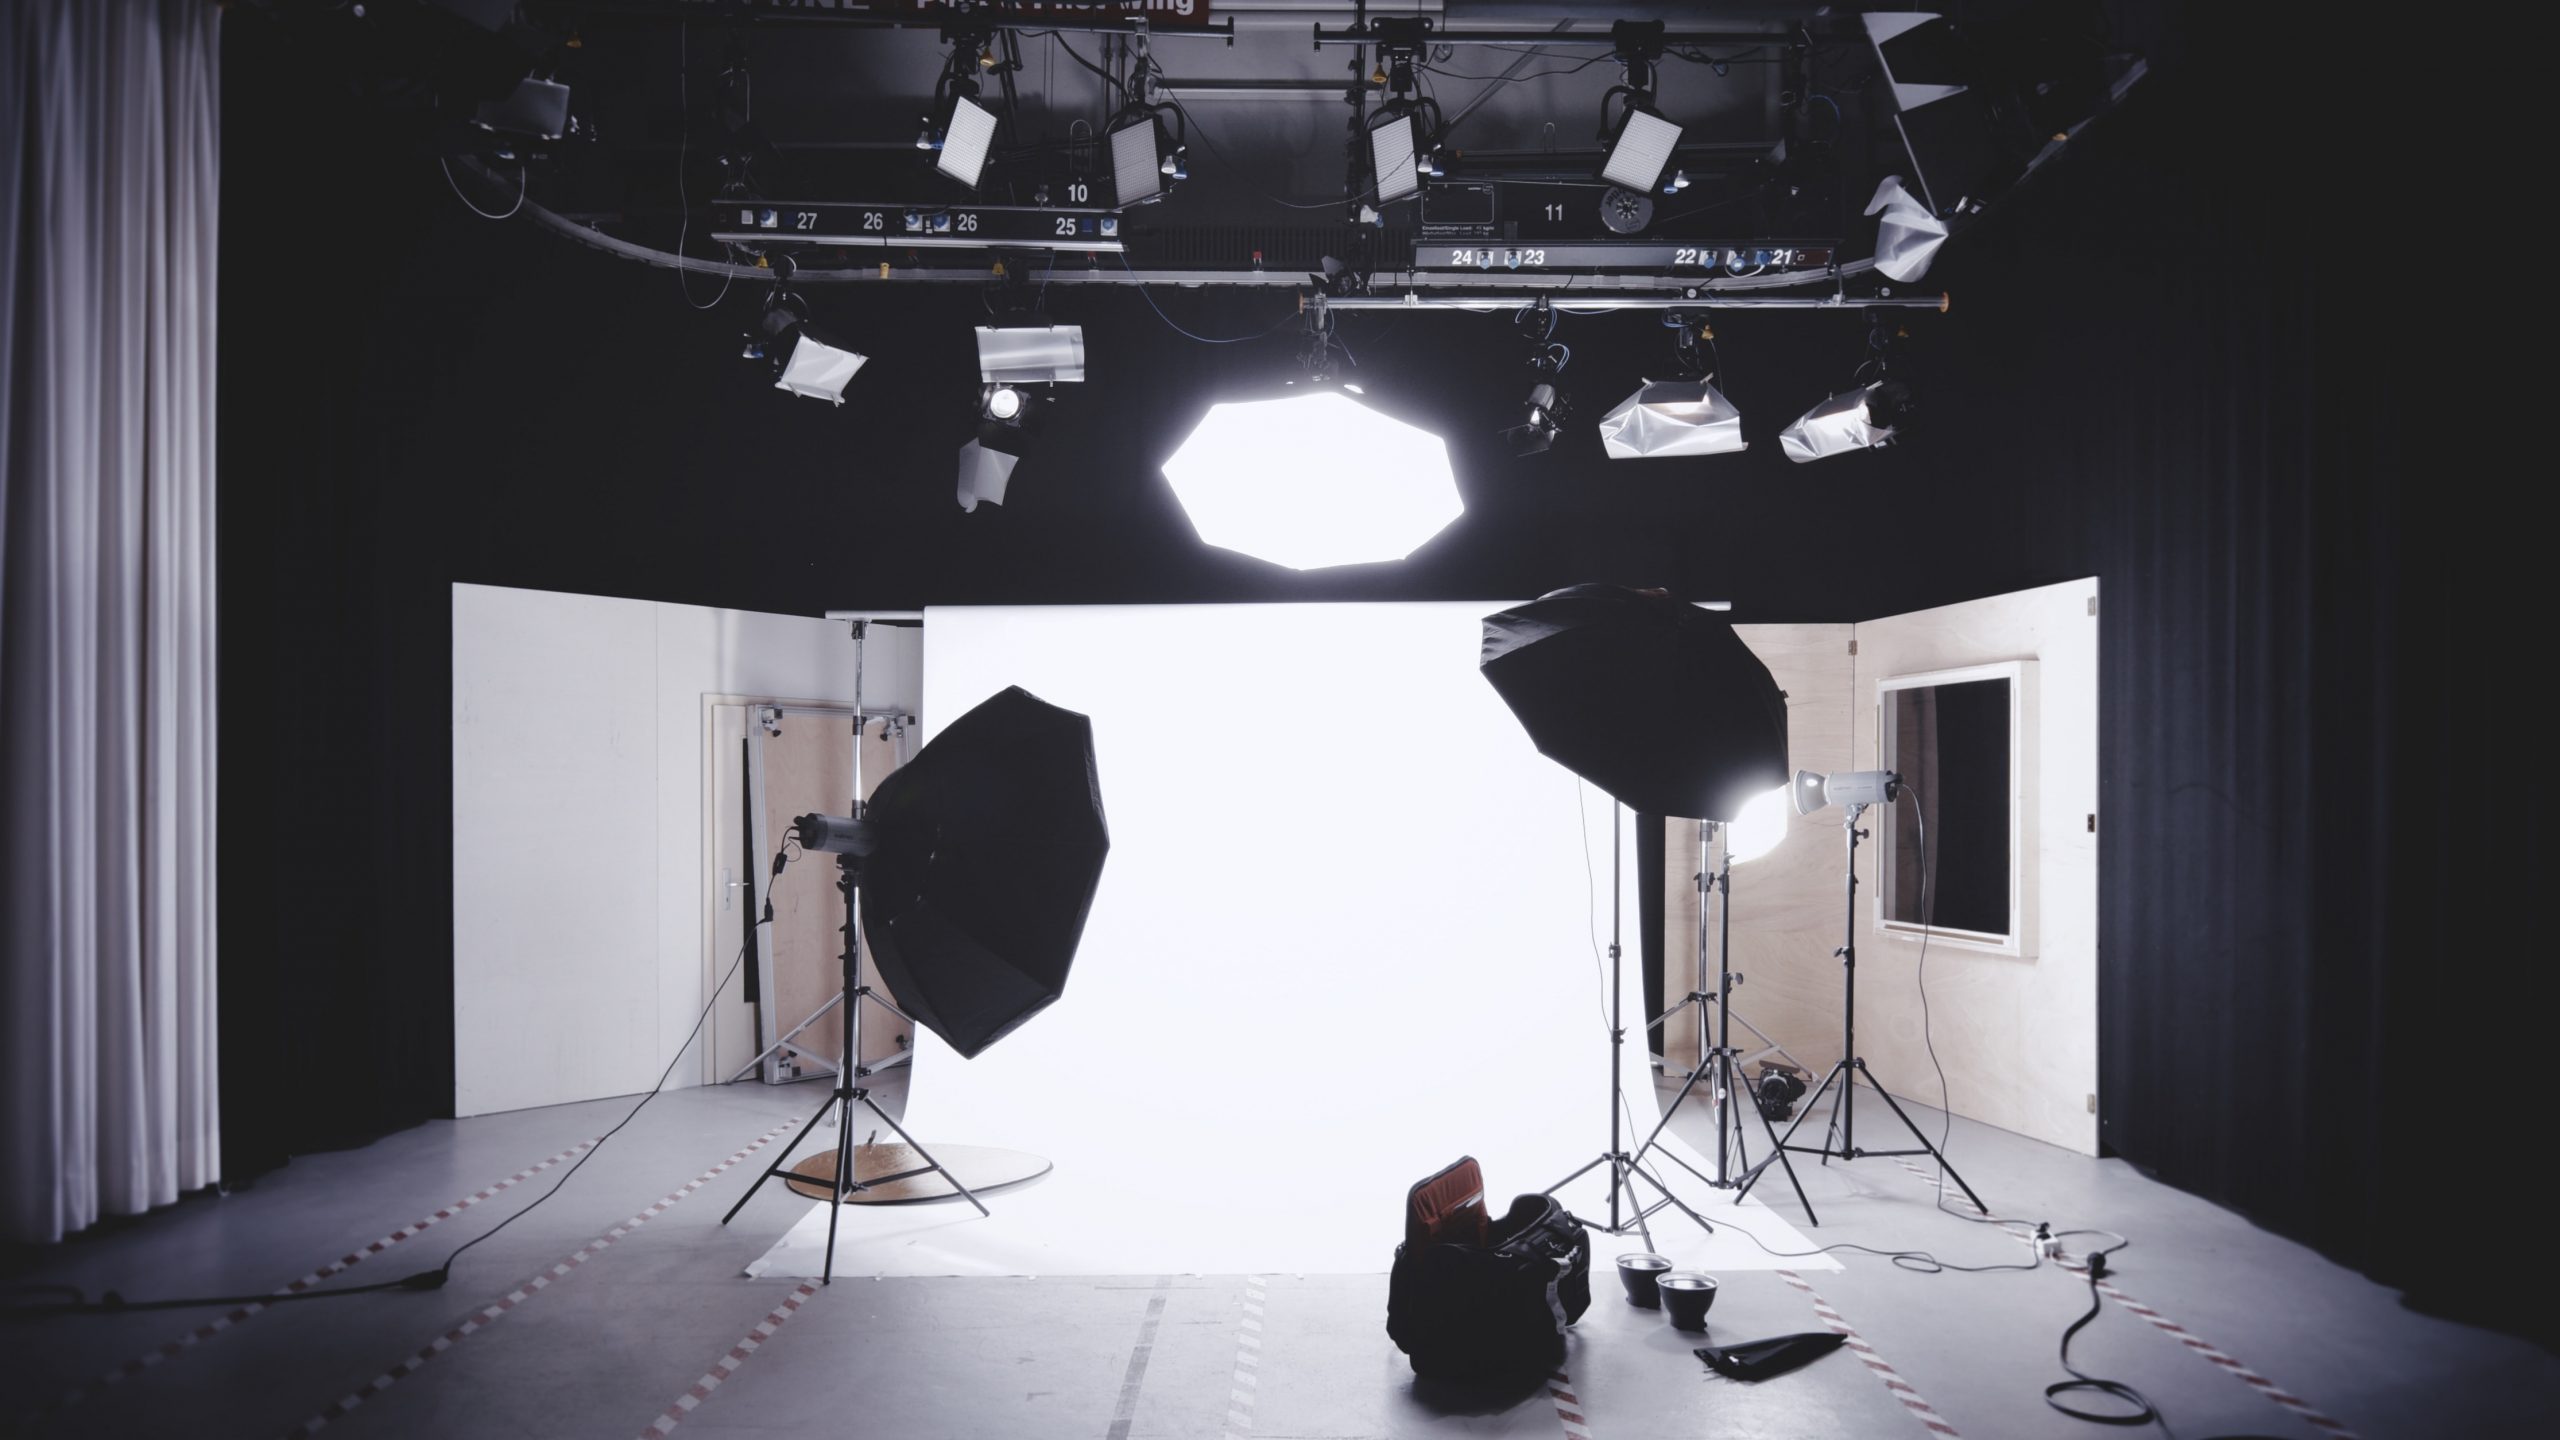 Lighting effects for photography